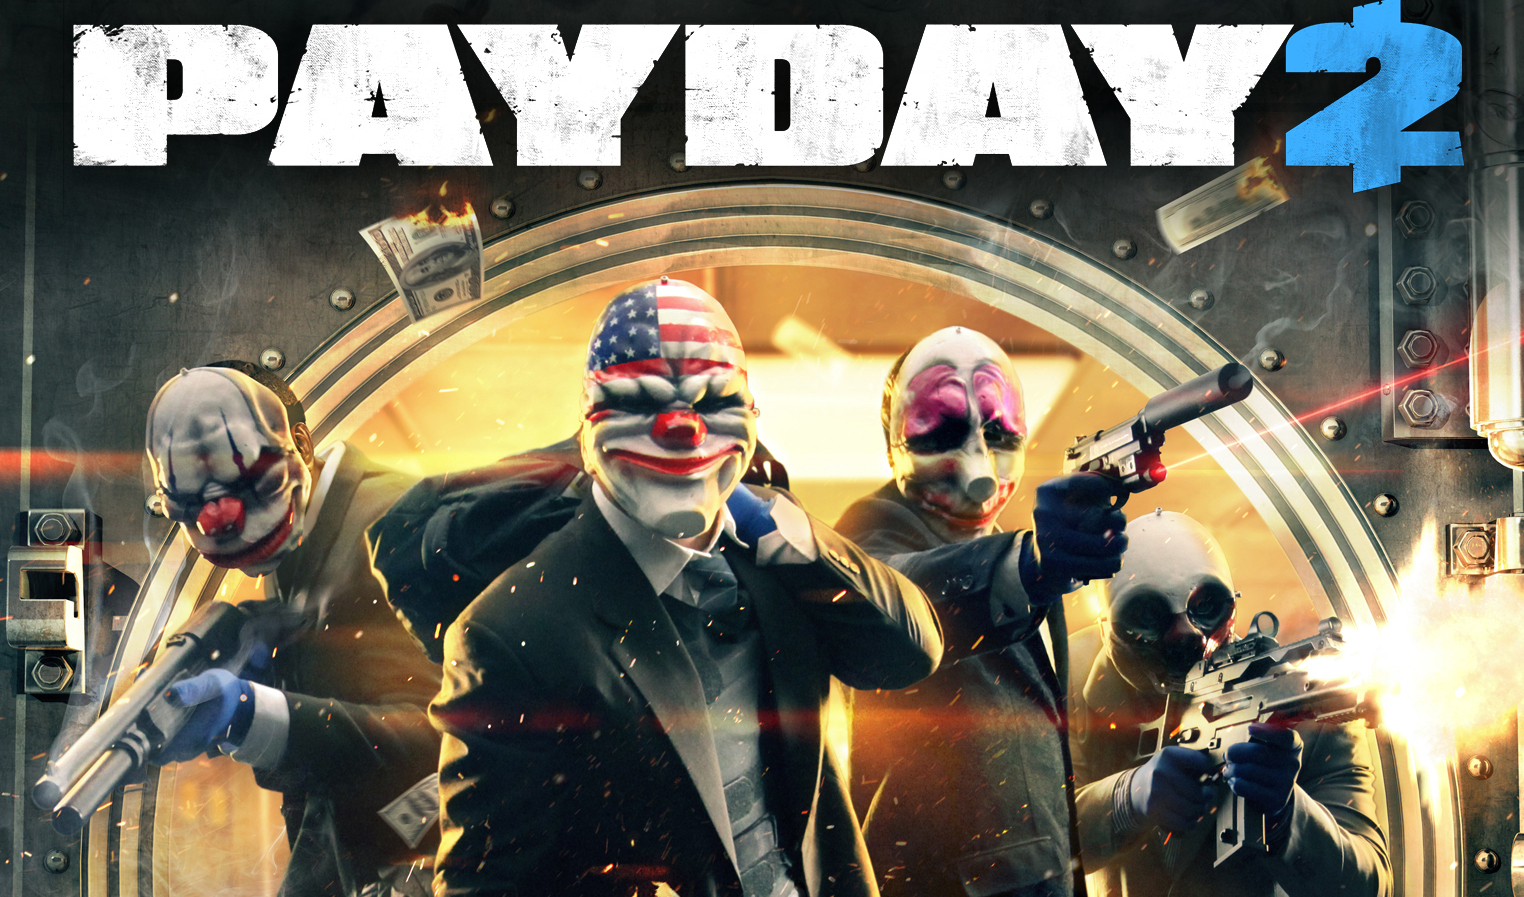 Moderators Refuse to Work After Update for “Payday 2” - Moderators Also Say They Don't Know What's Happening with Overkill